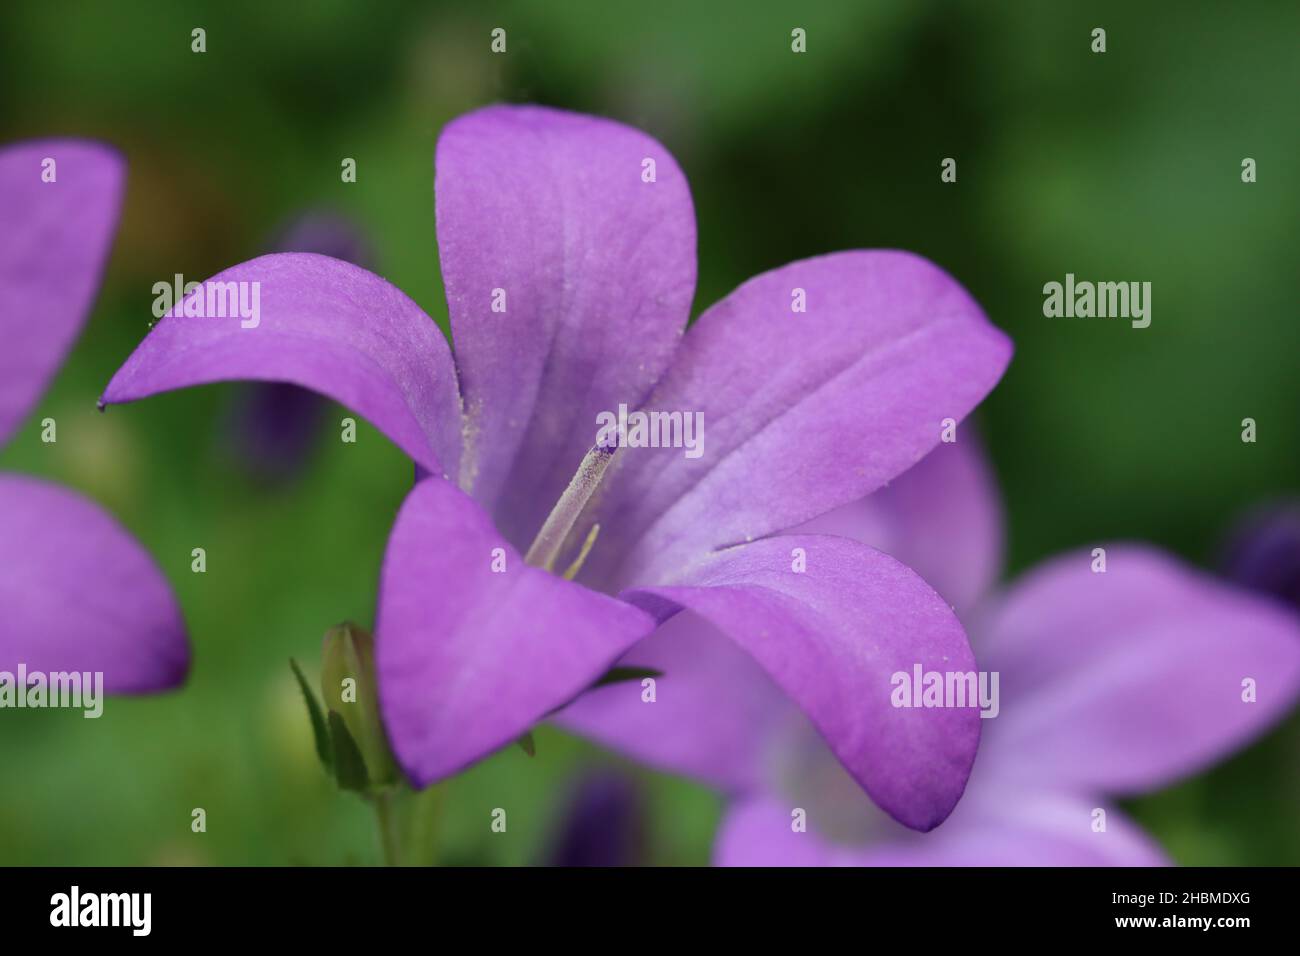 close-up of a single violet-blue bellflower with focus on the stamens Stock Photo